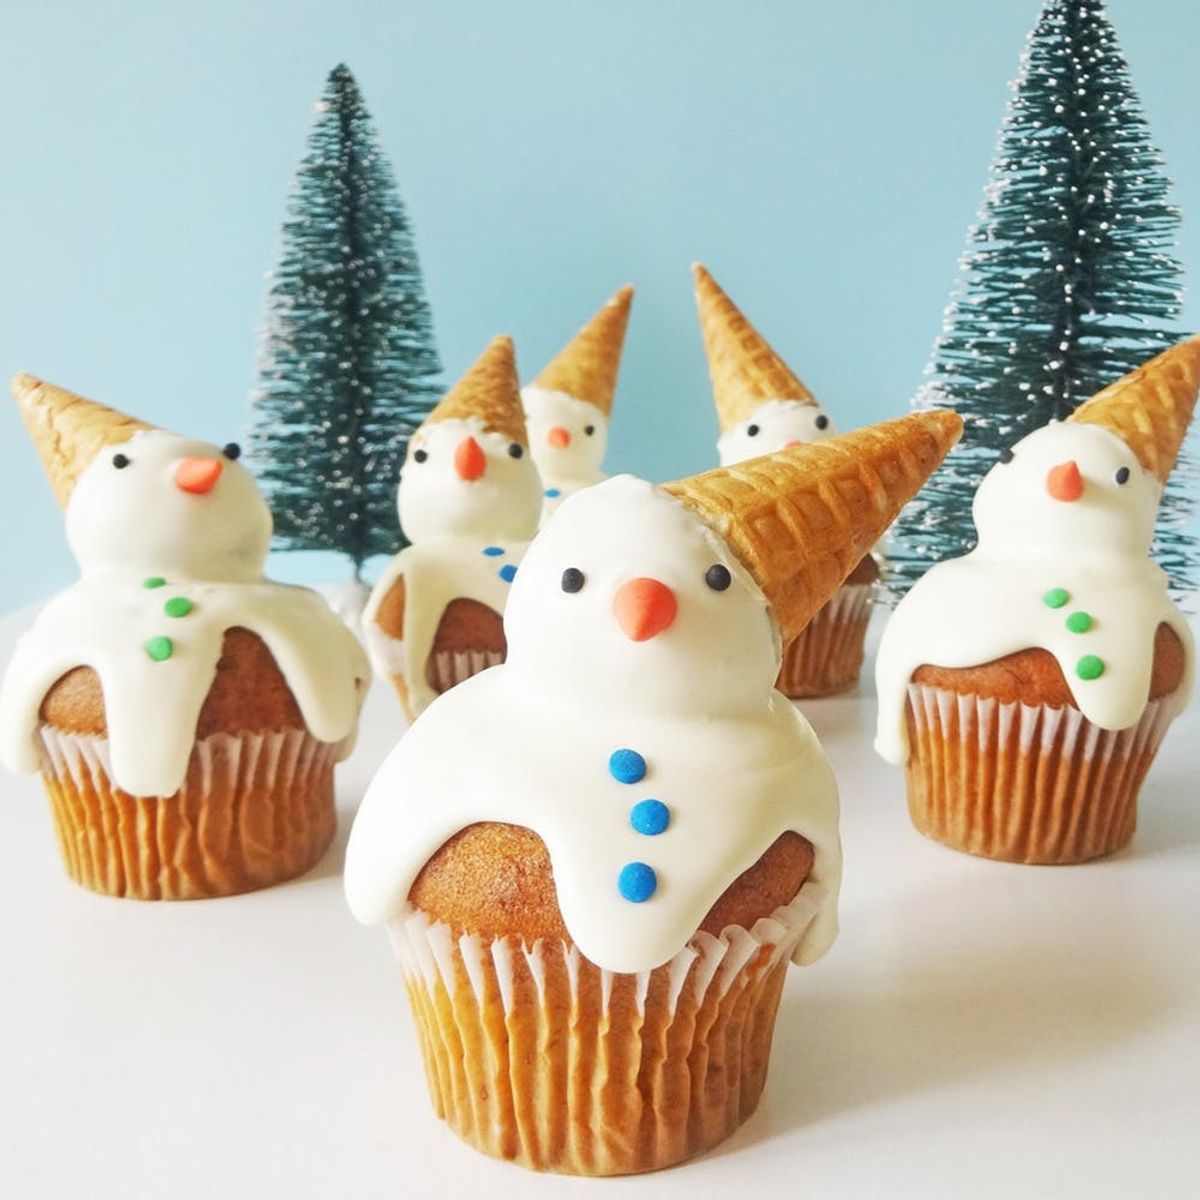 These Adorable Snowmen Cupcakes Will Make You Melt